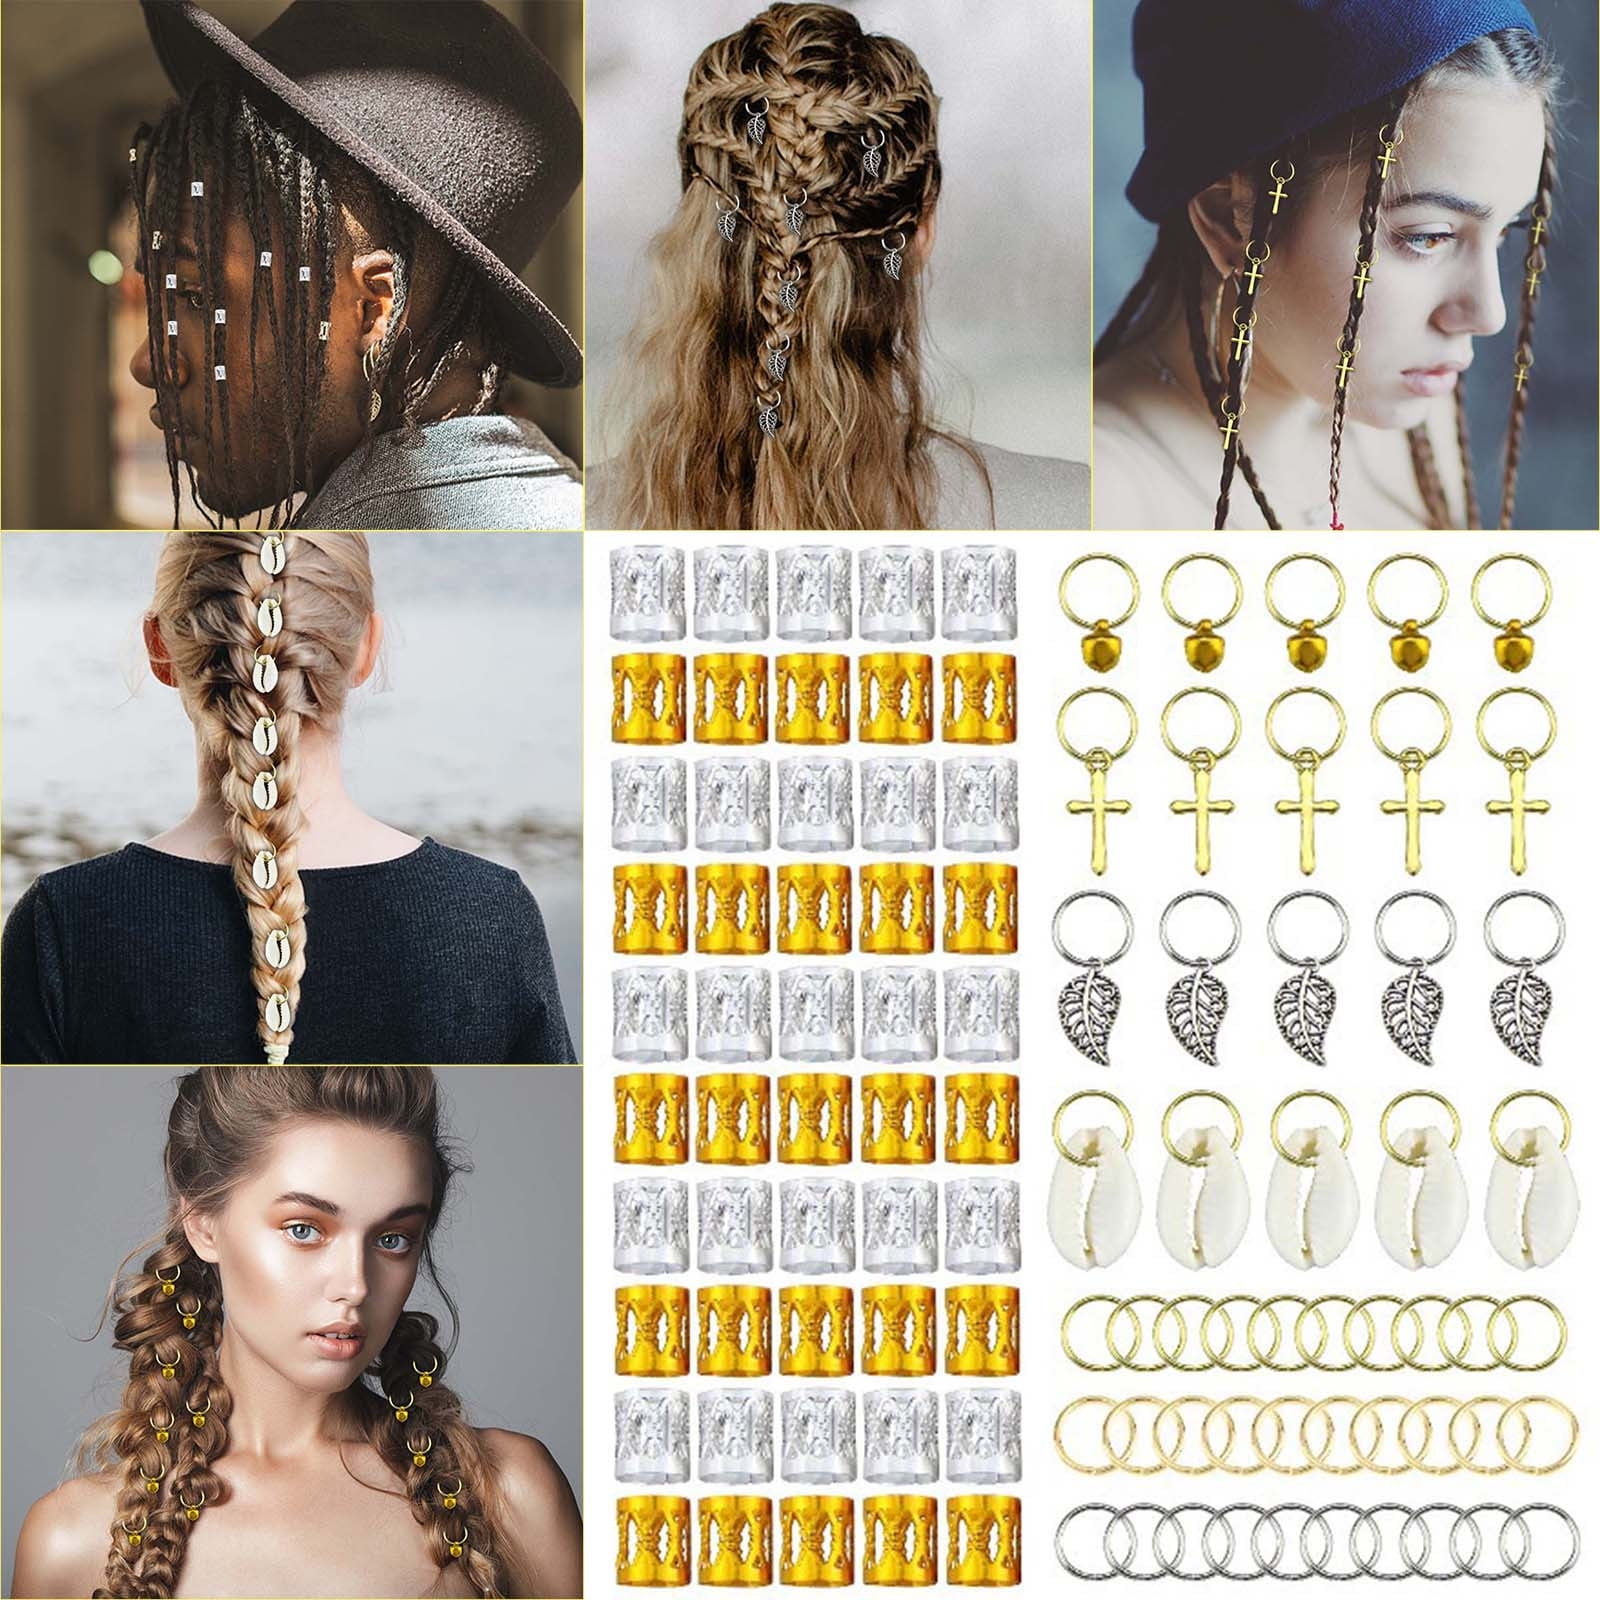 Fnochy Health and Beauty Products 100 Pcs Hair Beads for Braids, Hzpohyz Hair Jewelry LOC Jewelry for Hair Braids,Dreadlocks Accessories, Rings Clips